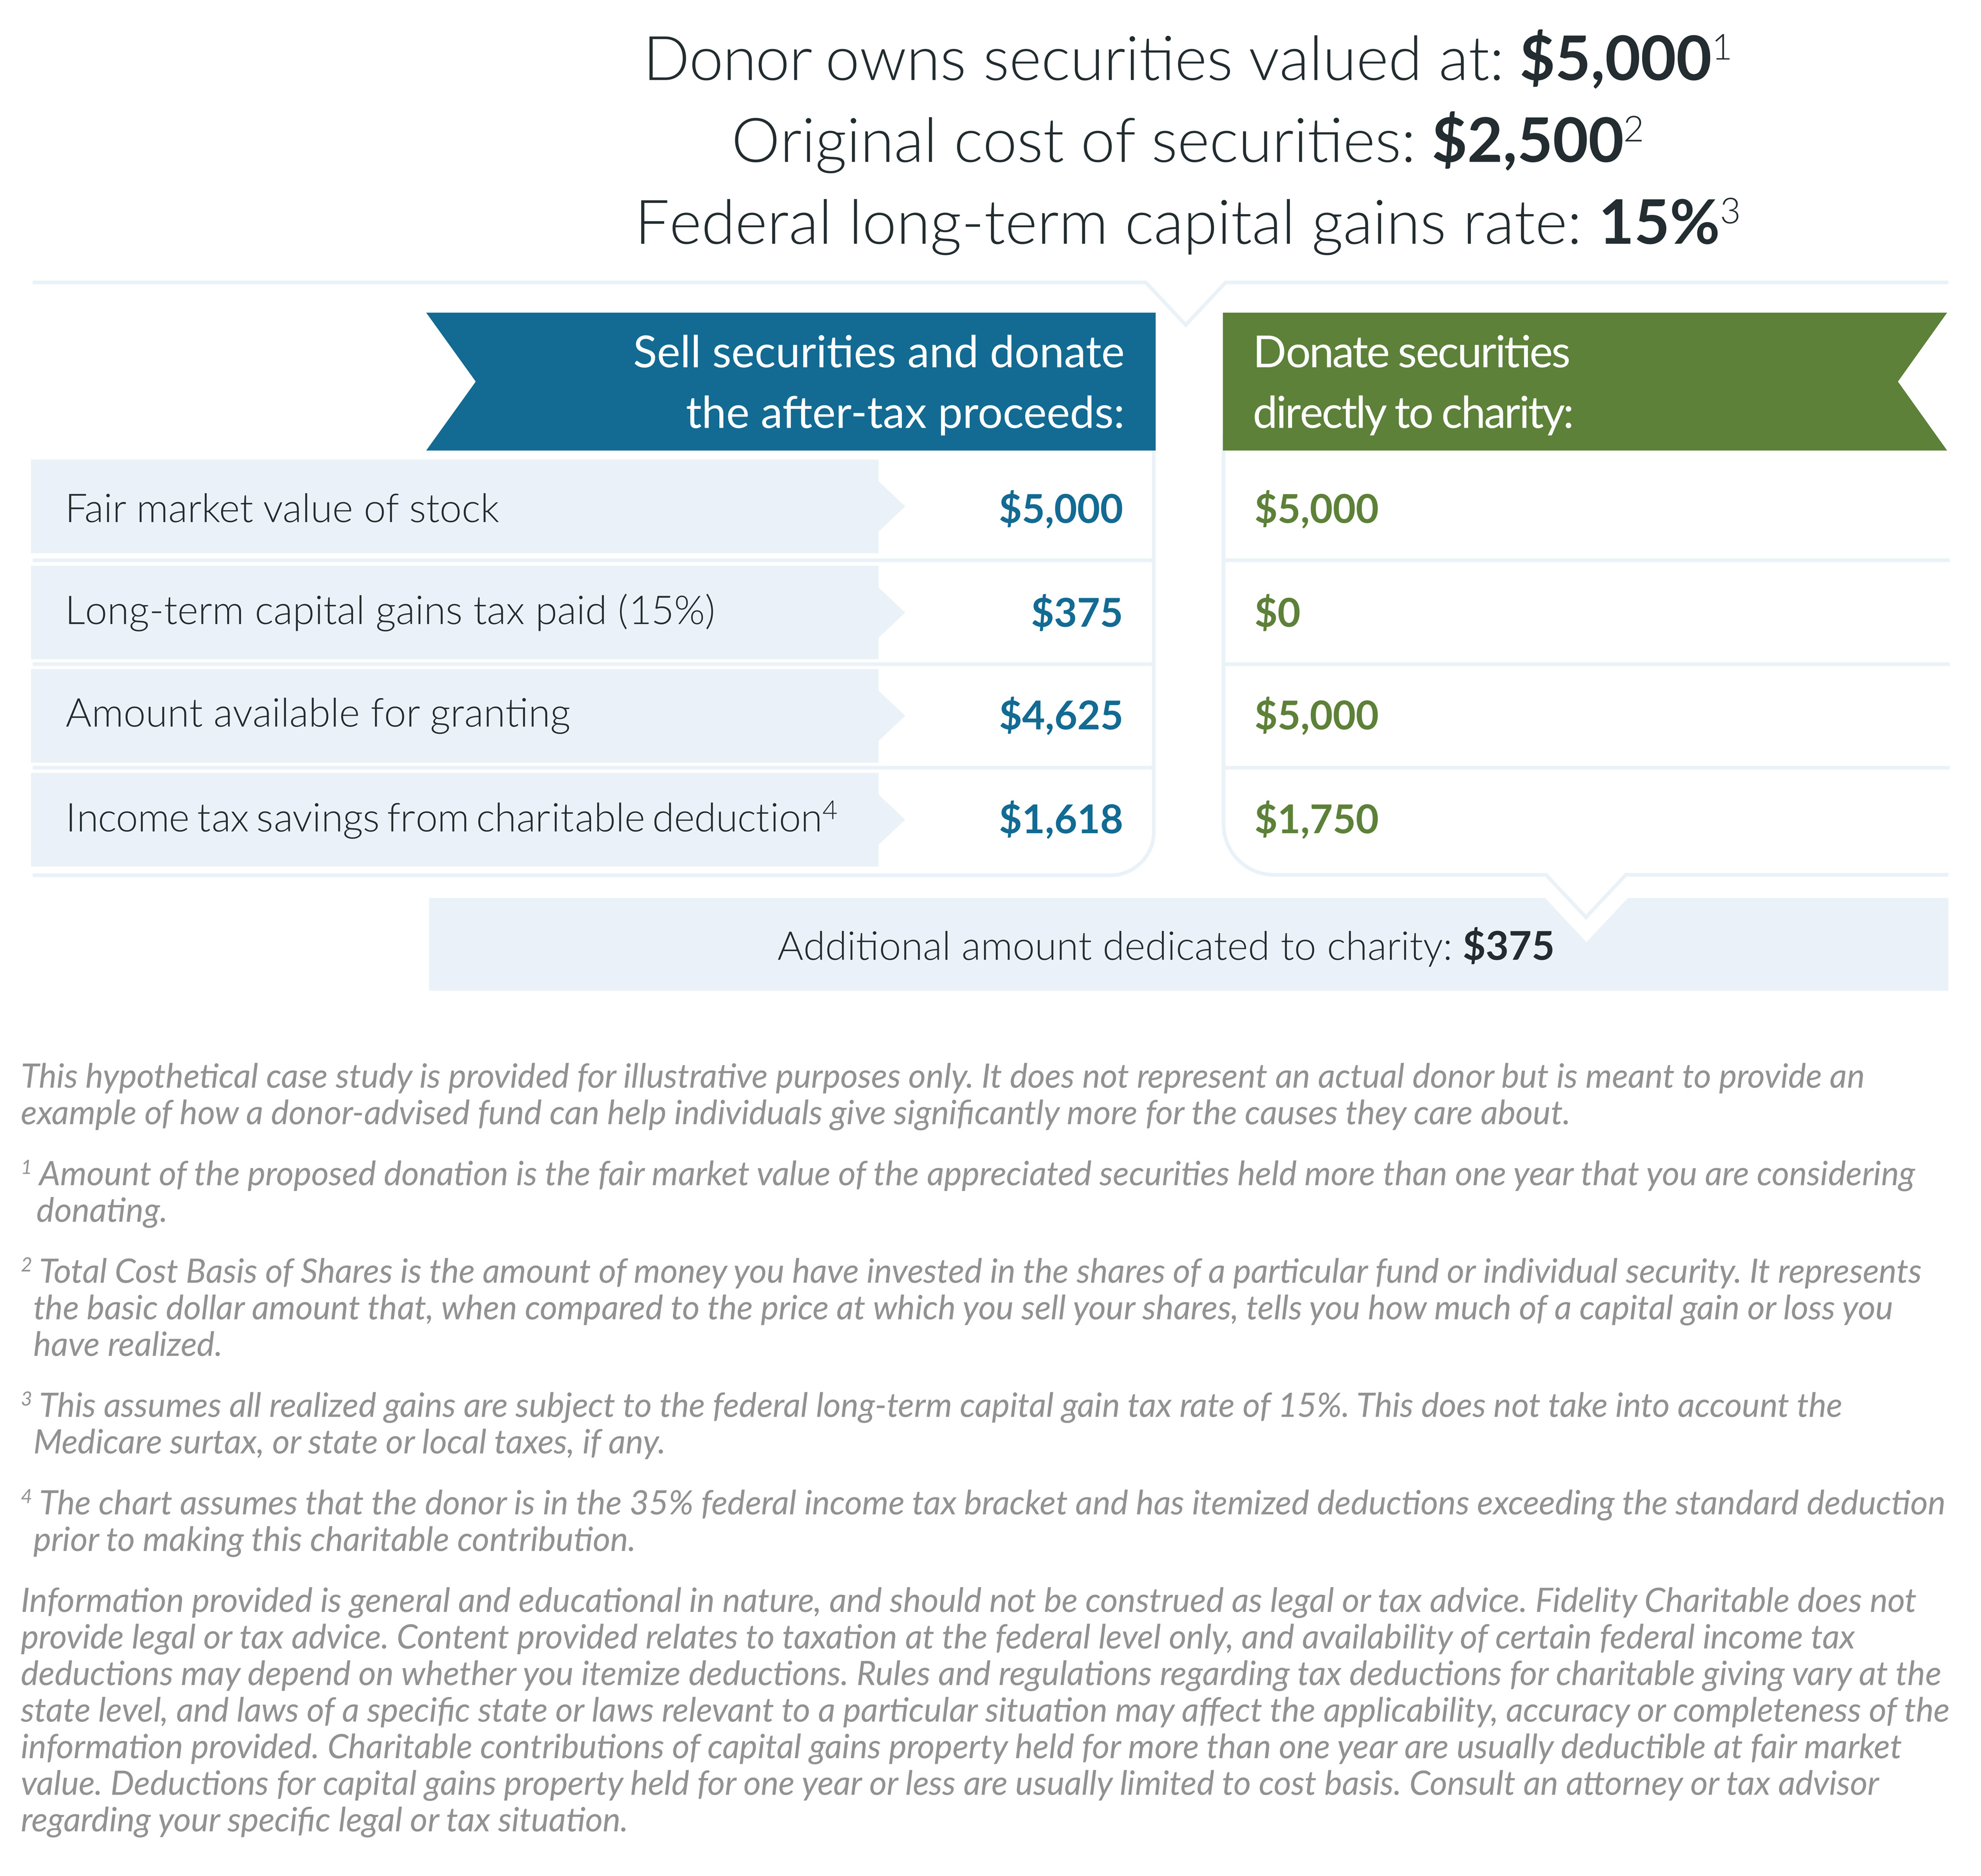 A chart demonstrating how donating $5,000 in securities directly to a charity instead of selling the securities and donating the after-tax proceeds could allow for an additional $375 to be dedicated to the charity.